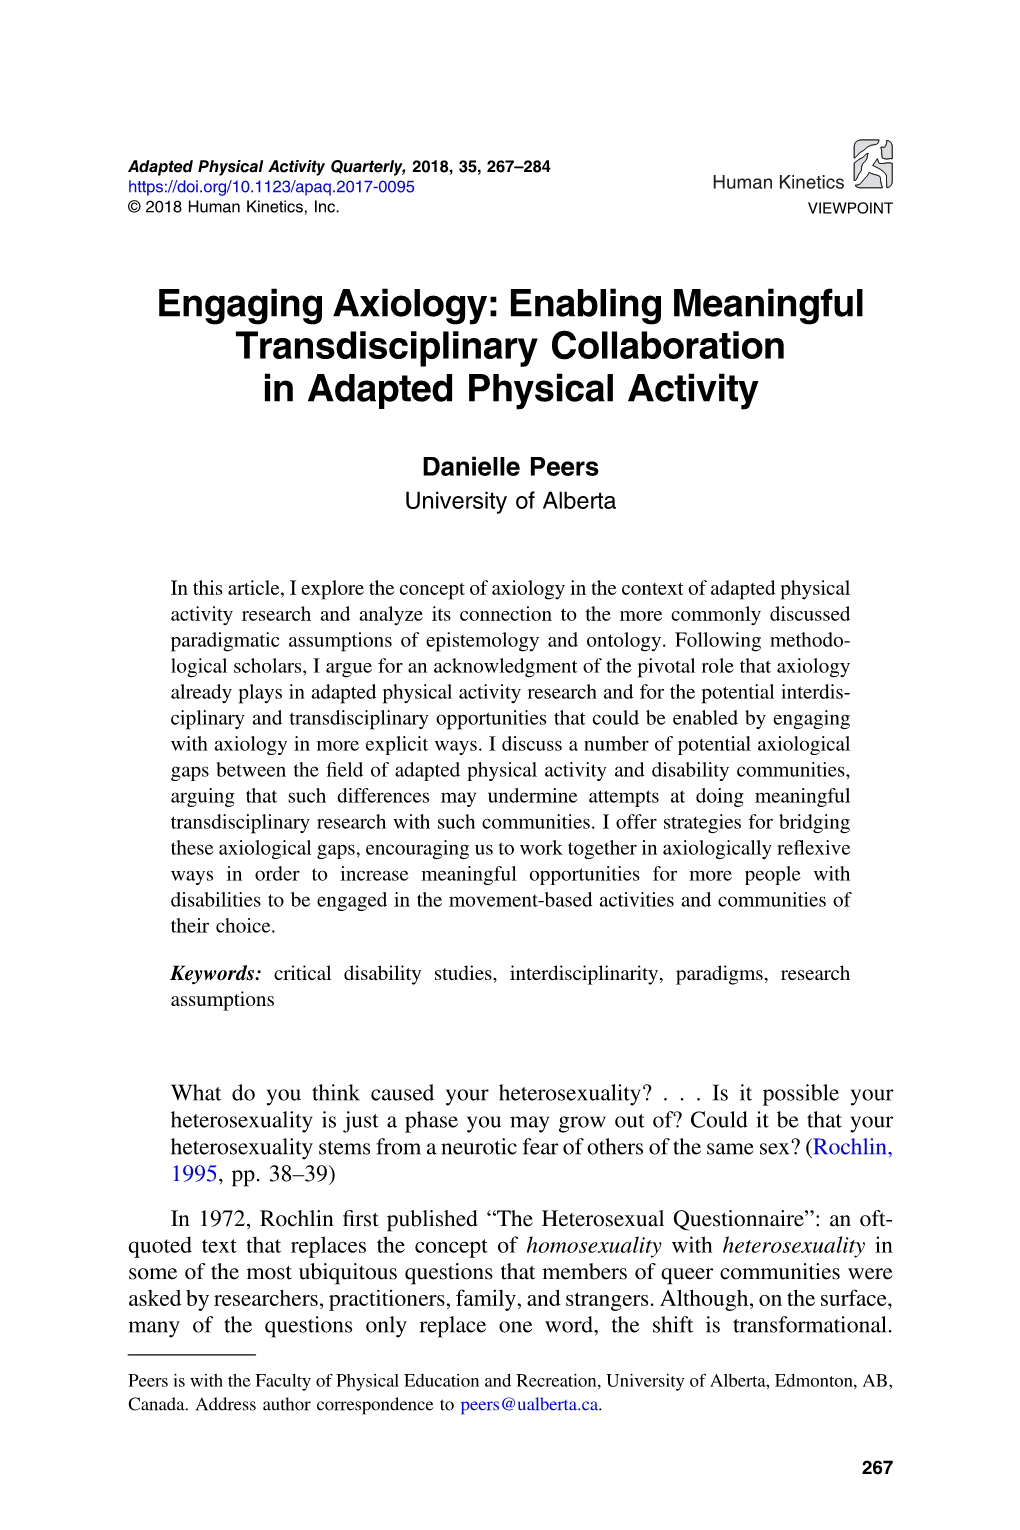 Engaging Axiology: Enabling Meaningful Transdisciplinary Collaboration in Adapted Physical Activity